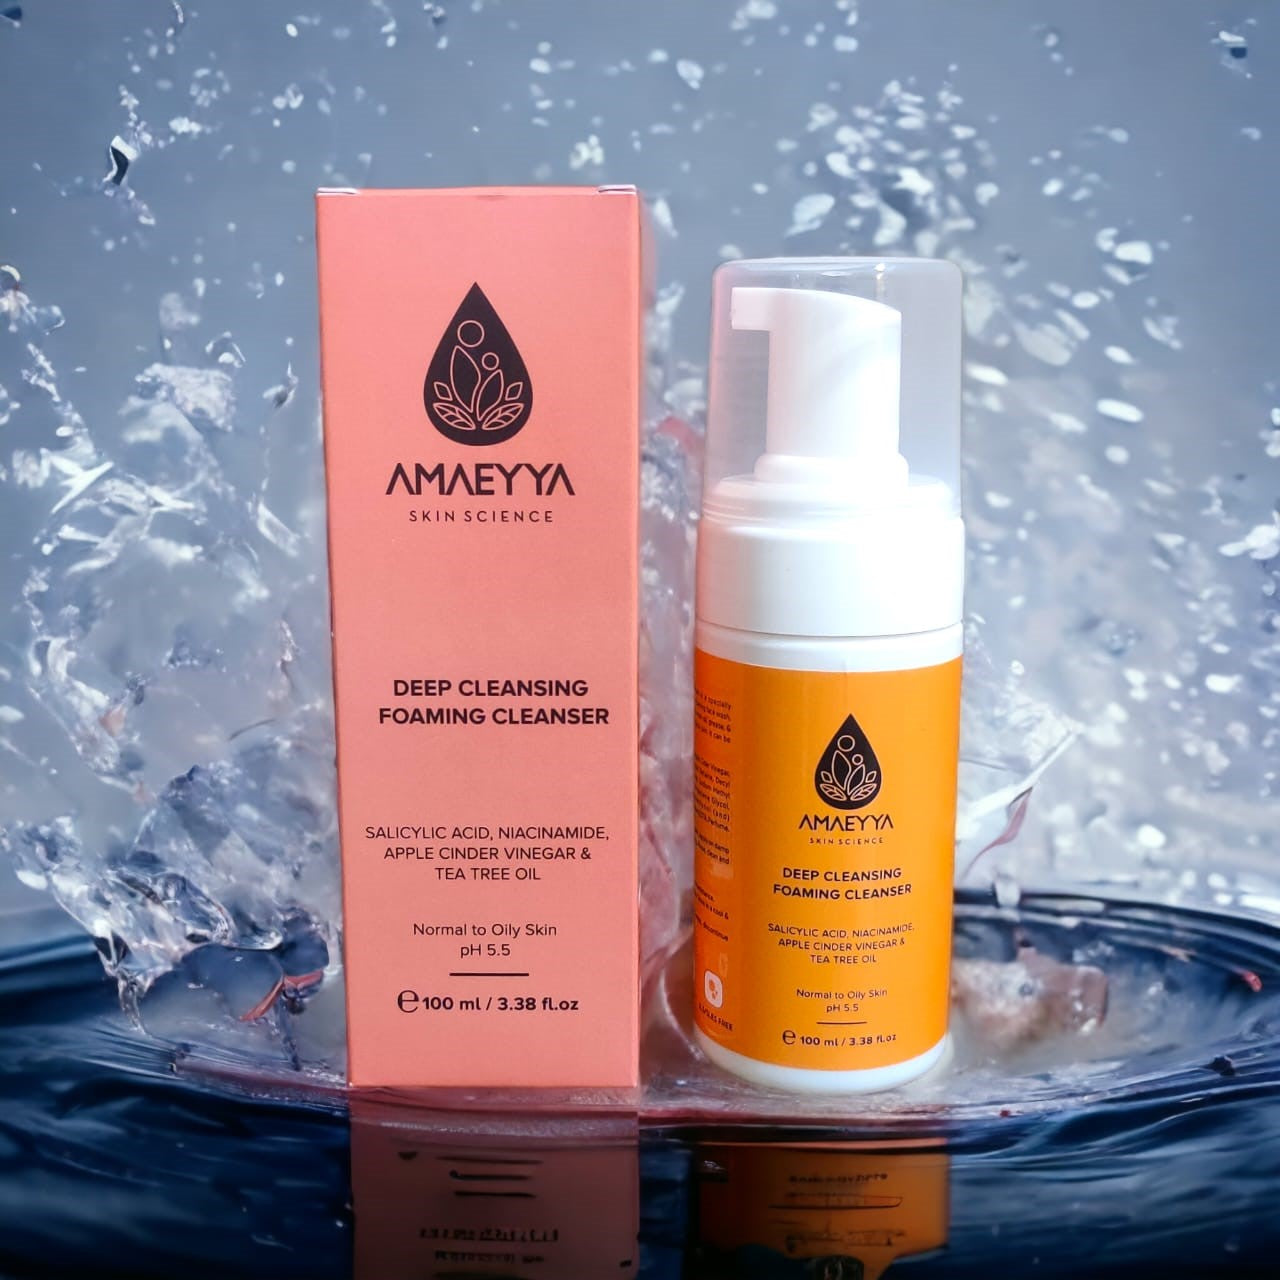 AMAEYYA Deep Cleansing Foaming Cleanser with Salicylic Acid, Tea Tree Oil,  Niacinamide & Apple Cider Vinegar for Normal to Oily Skin, pH 5.5